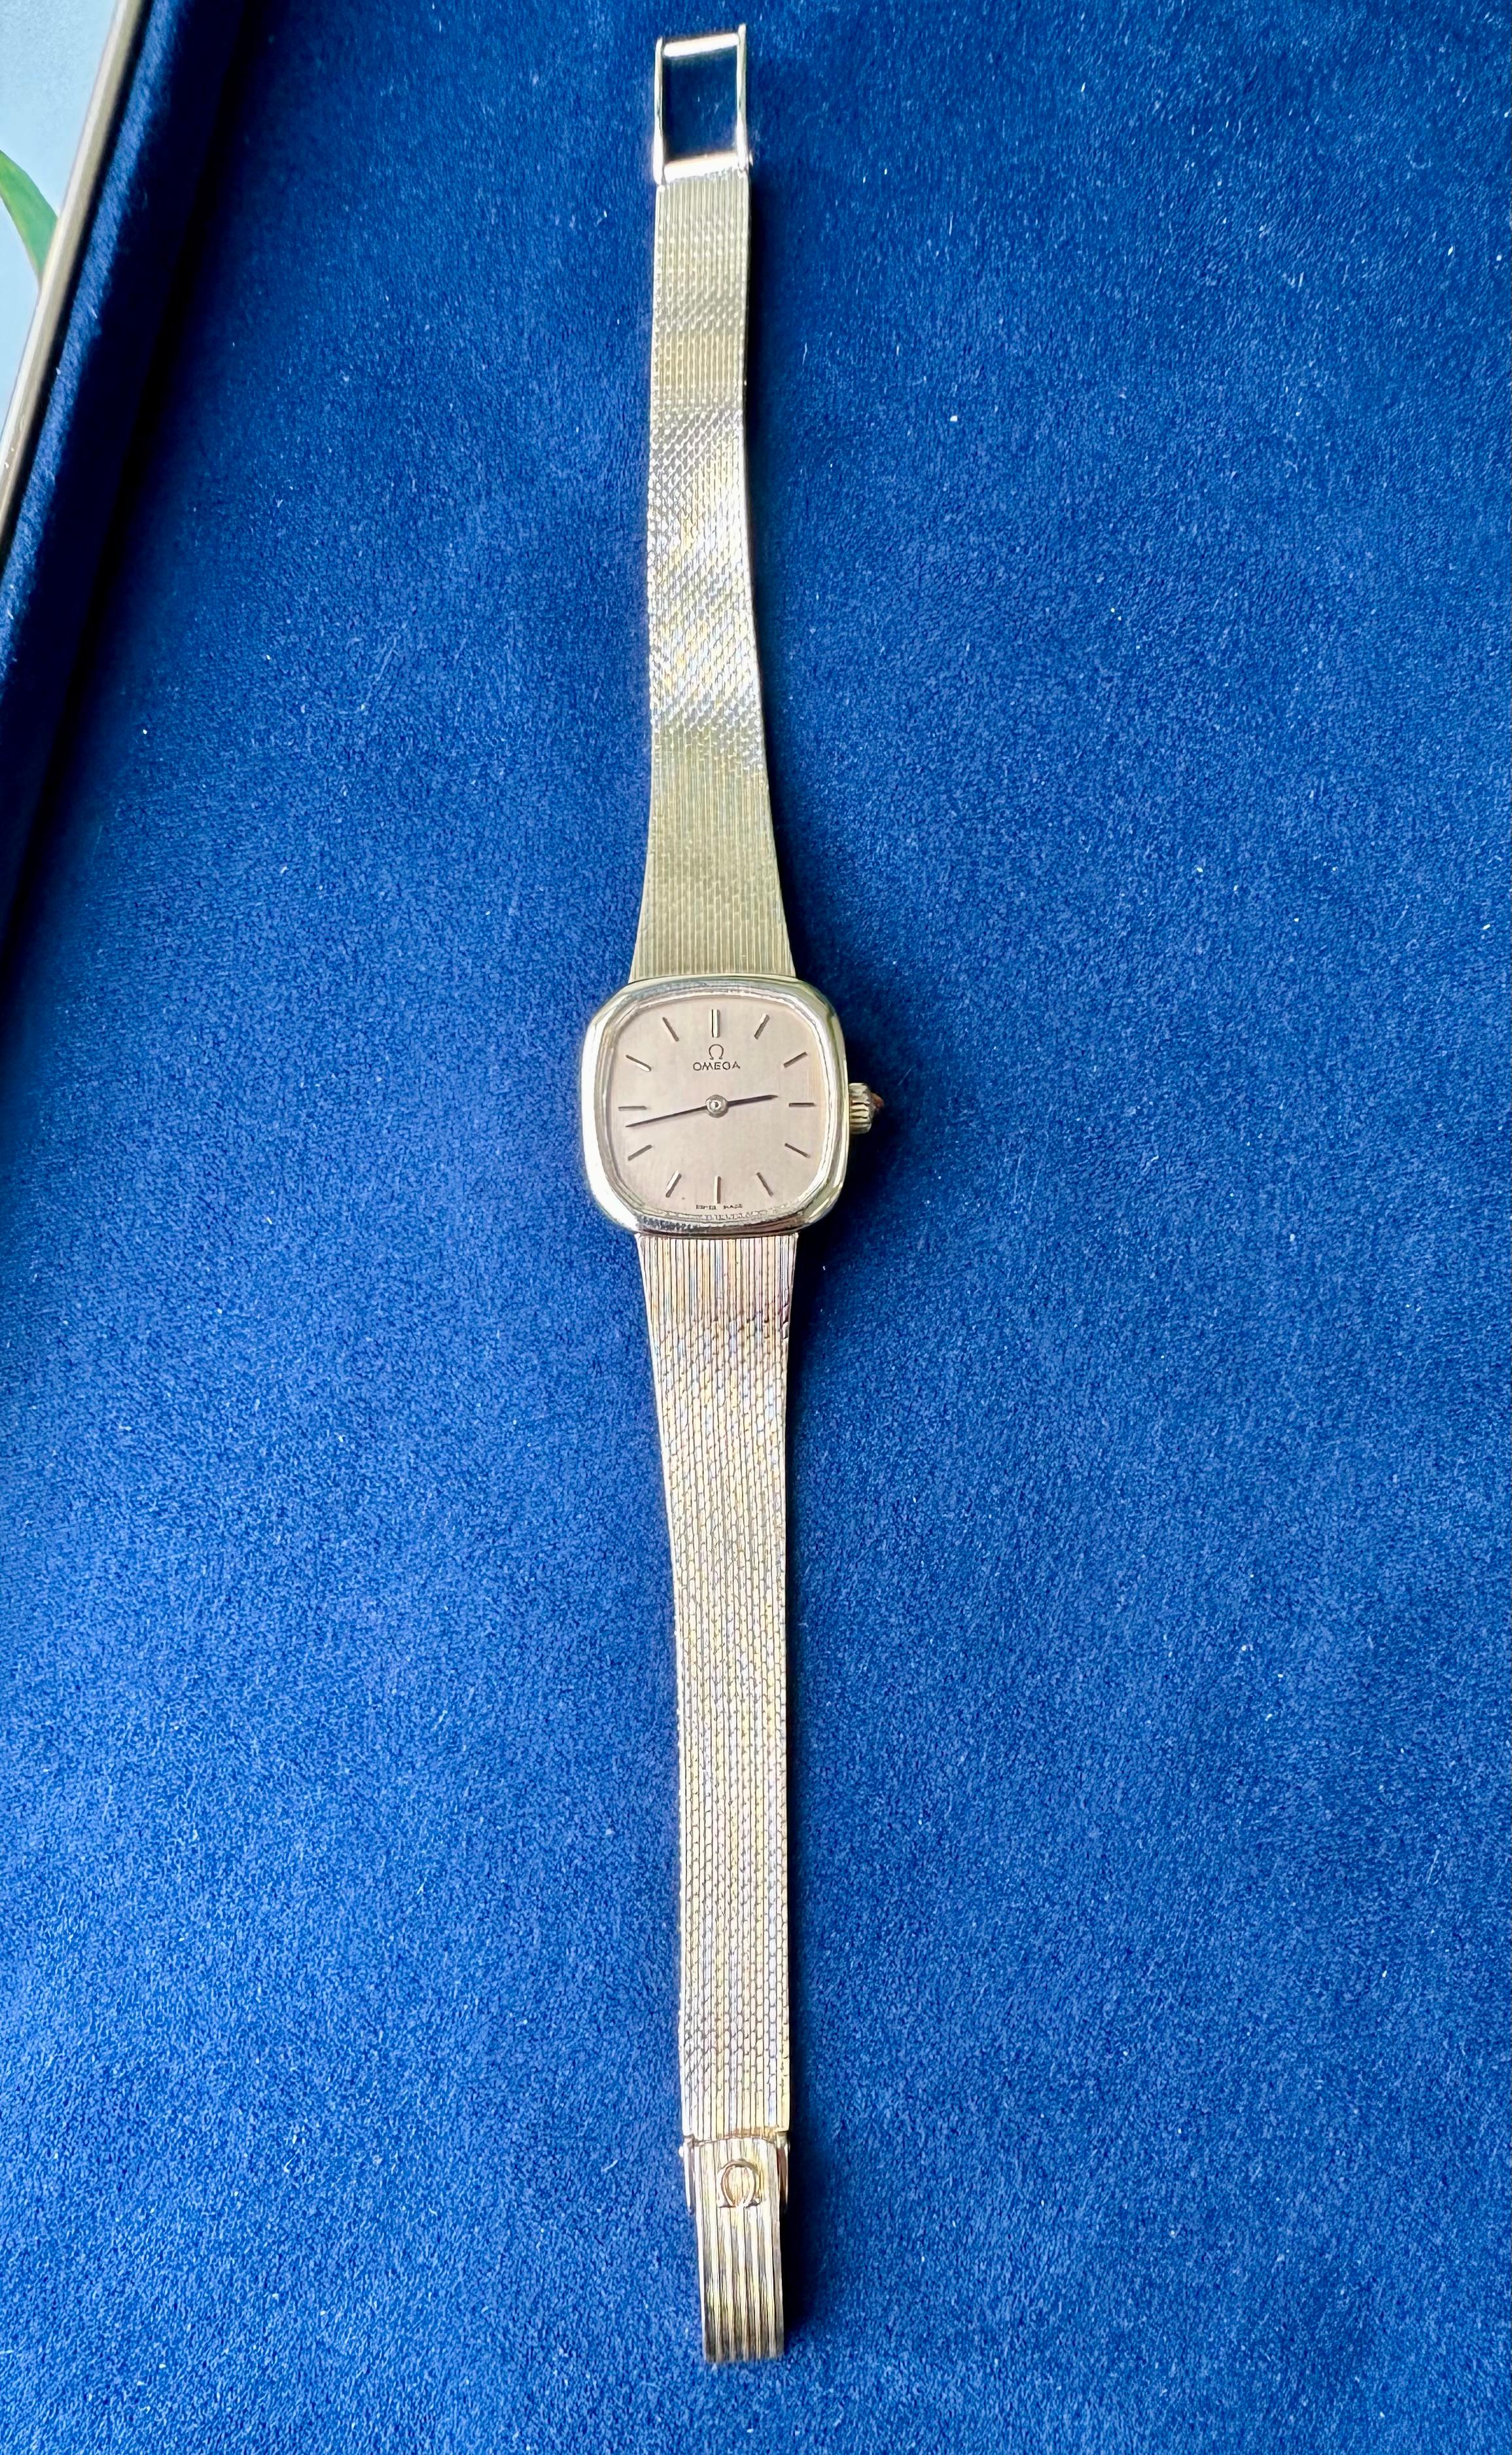  Omega 9k Yellow Gold Watch Manual Wind Vintage Watch In Good Condition For Sale In Houston, TX